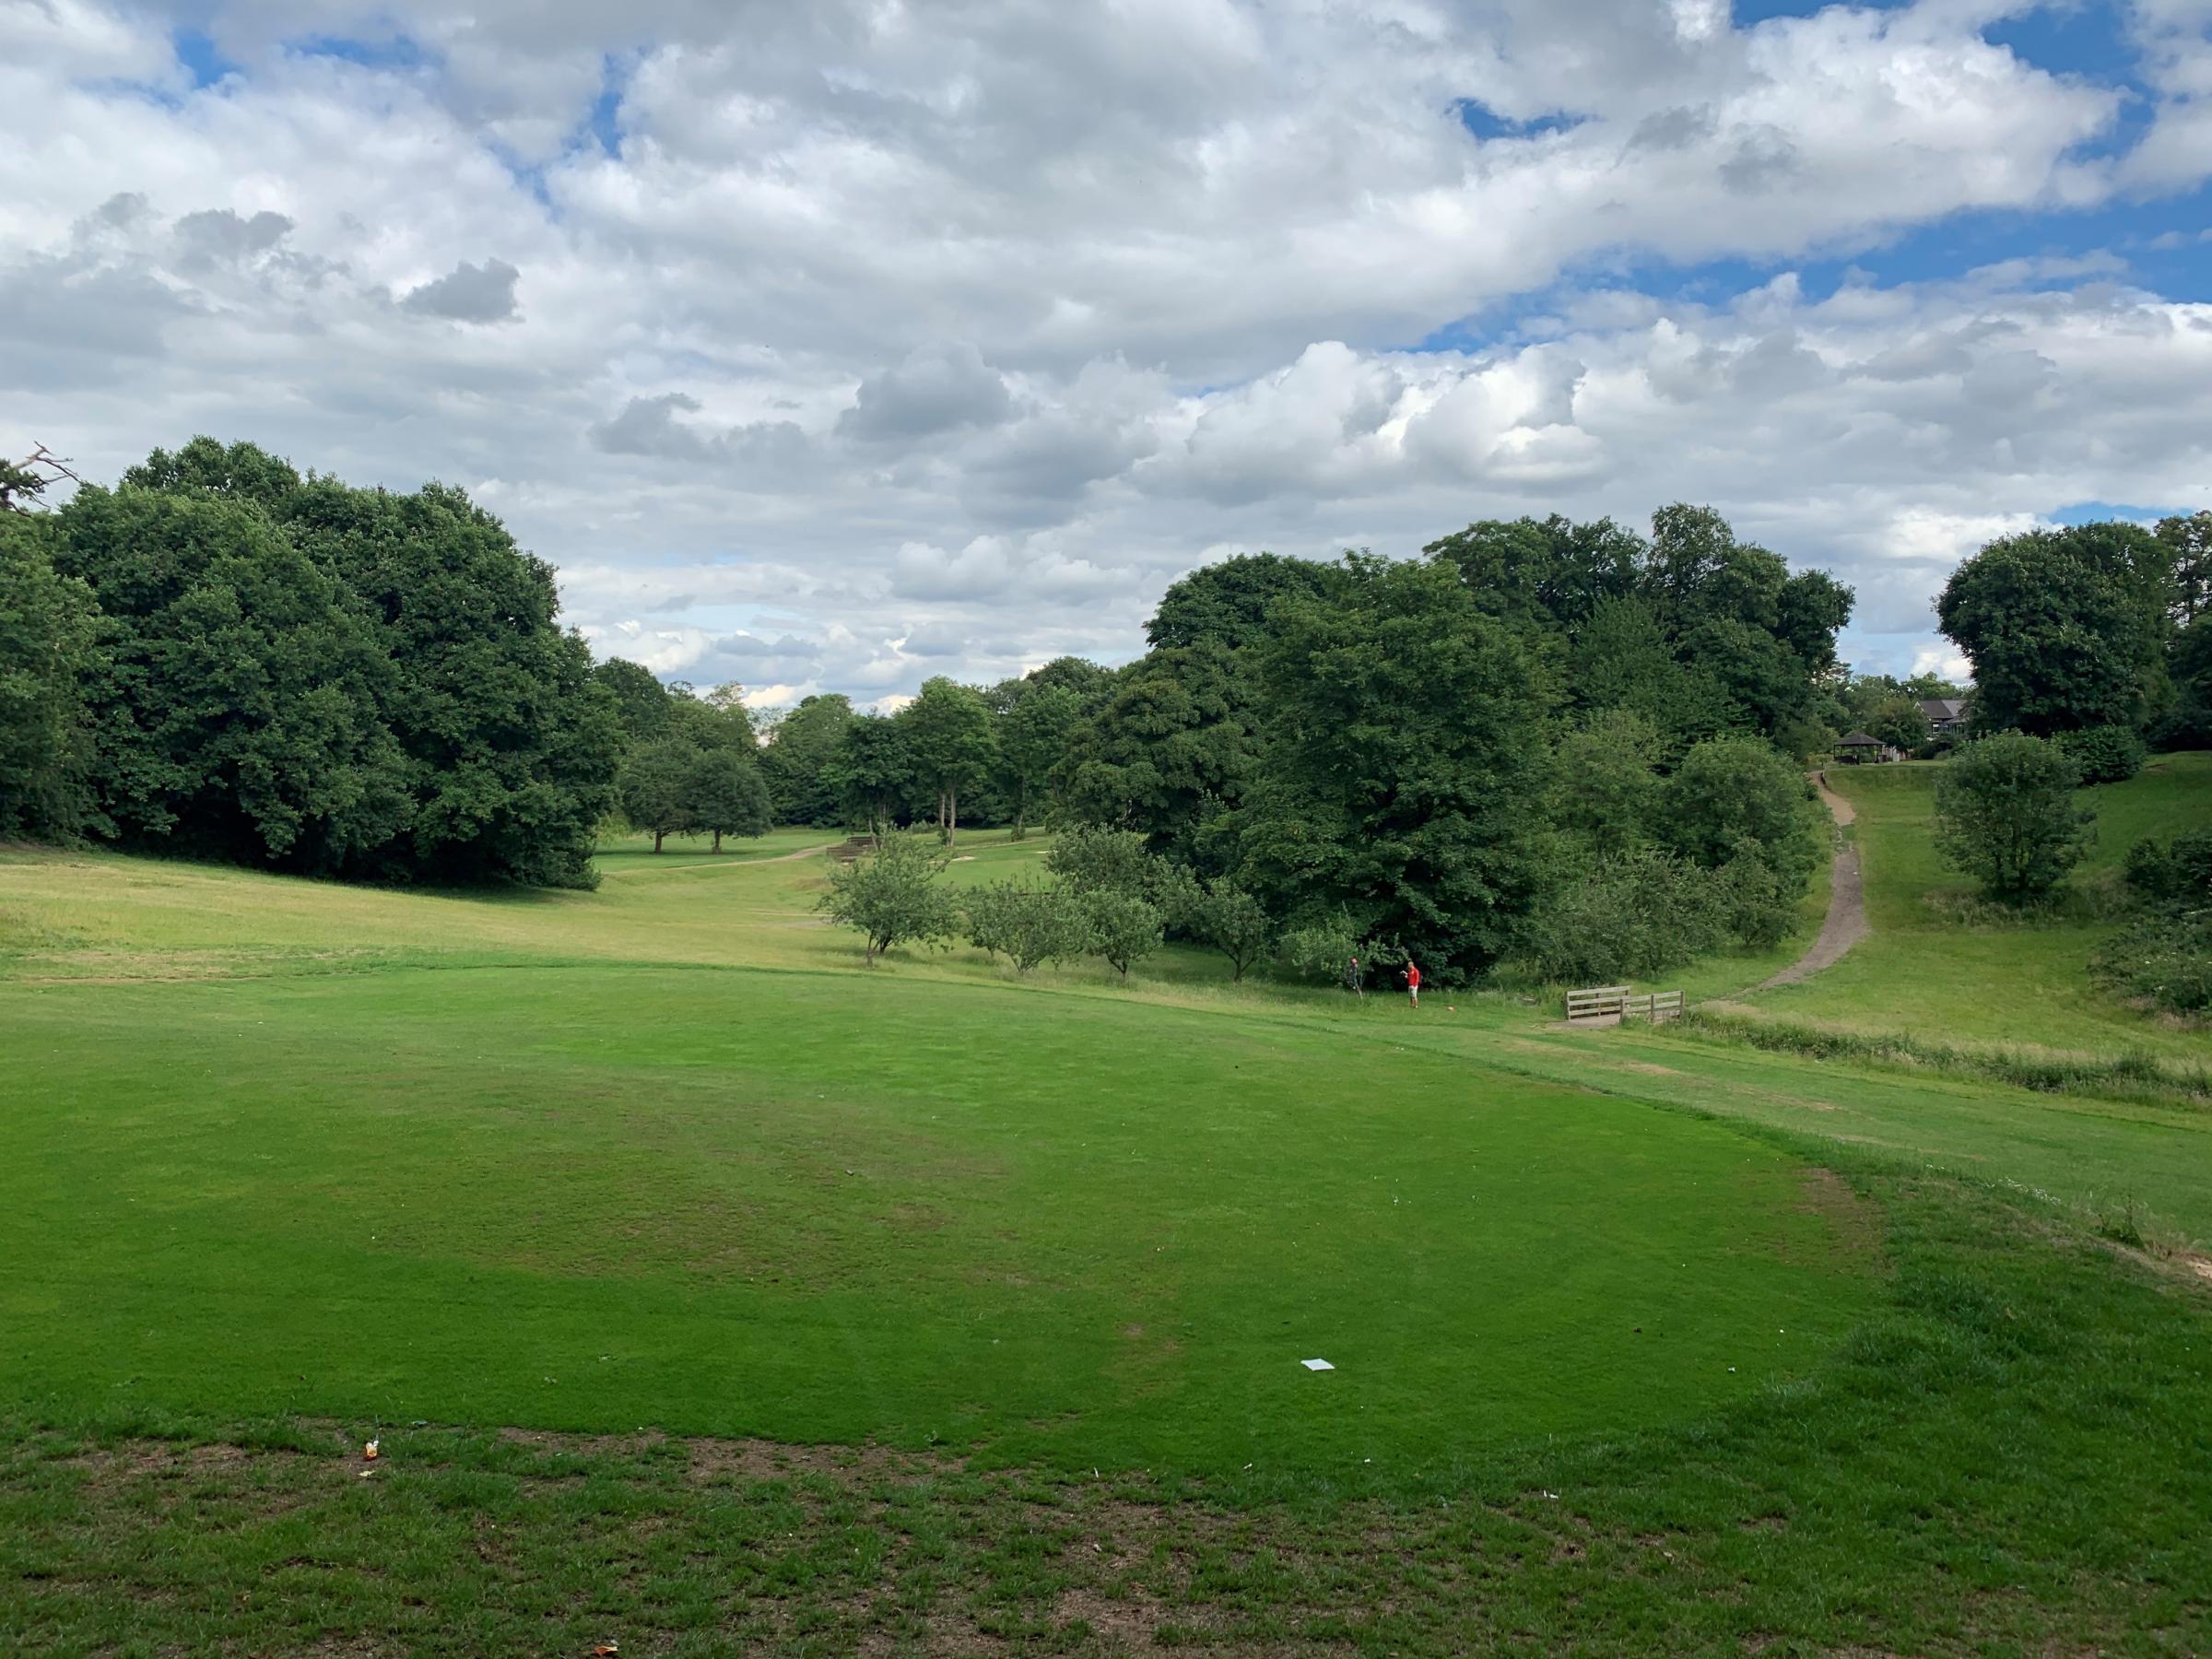 The golf course at Bushey Hall